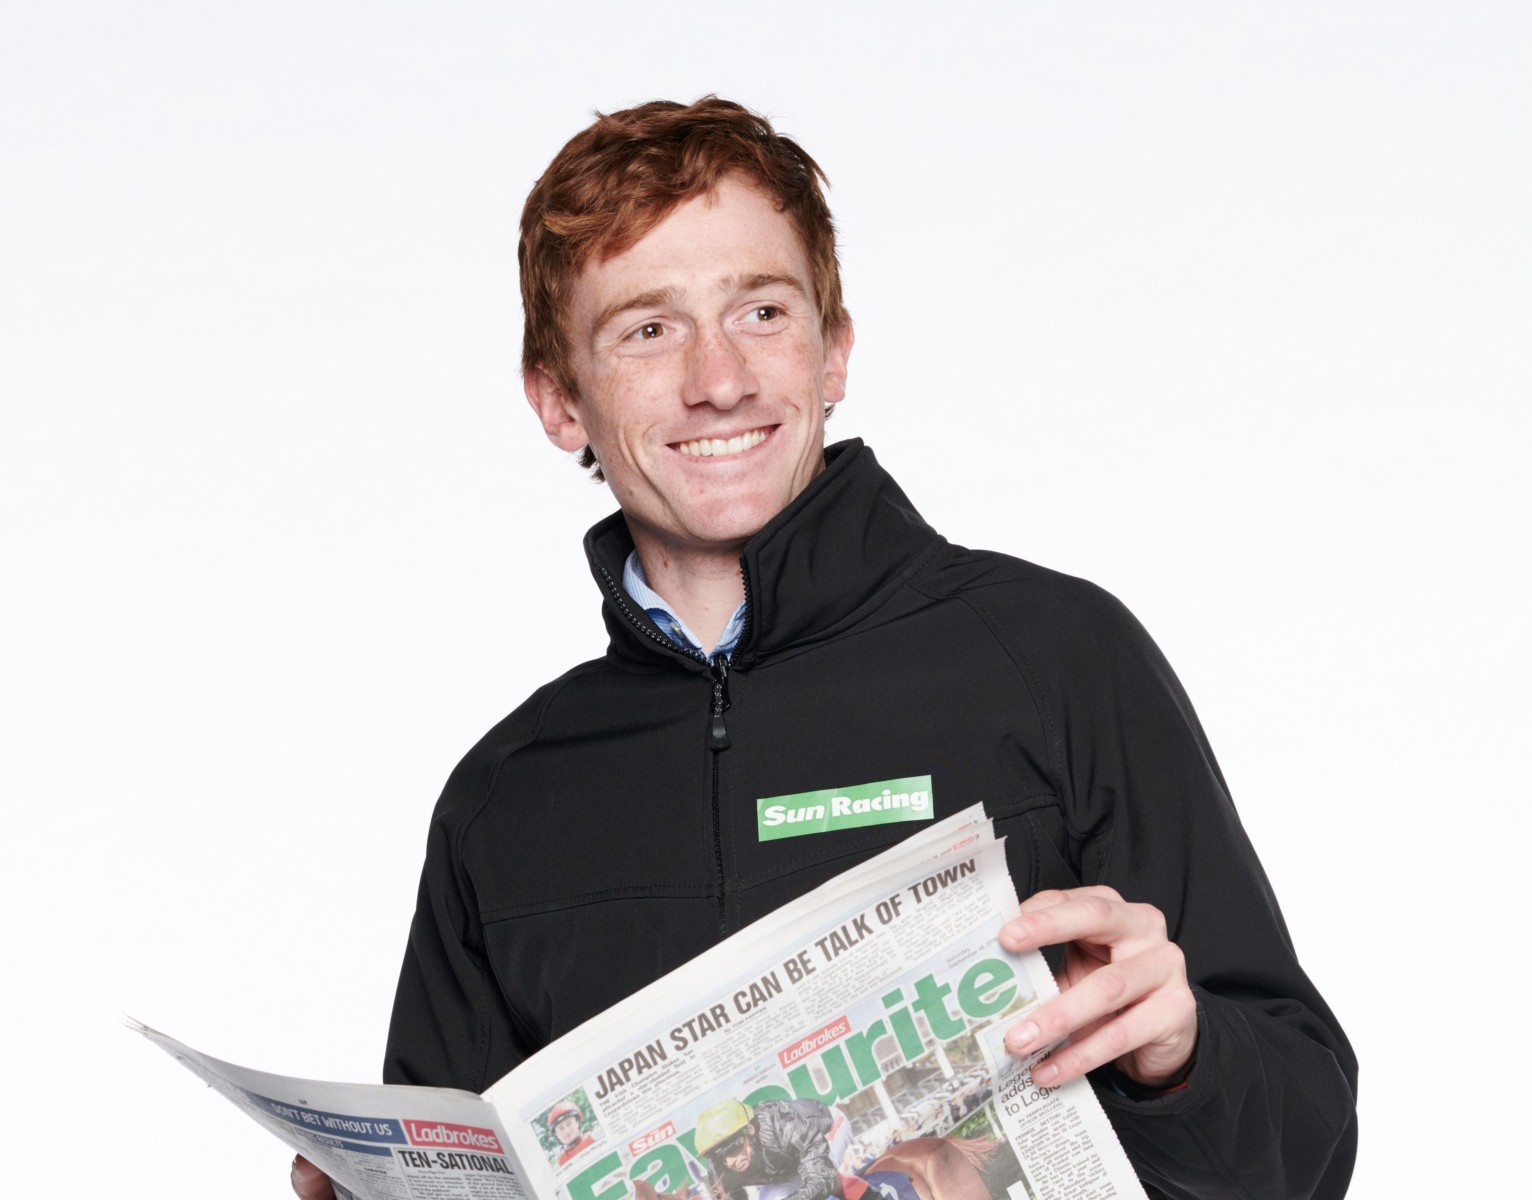 , Our man Sam Twiston-Davies looks ahead to the Cheltenham Festival and picks out one horse he’d love to ride